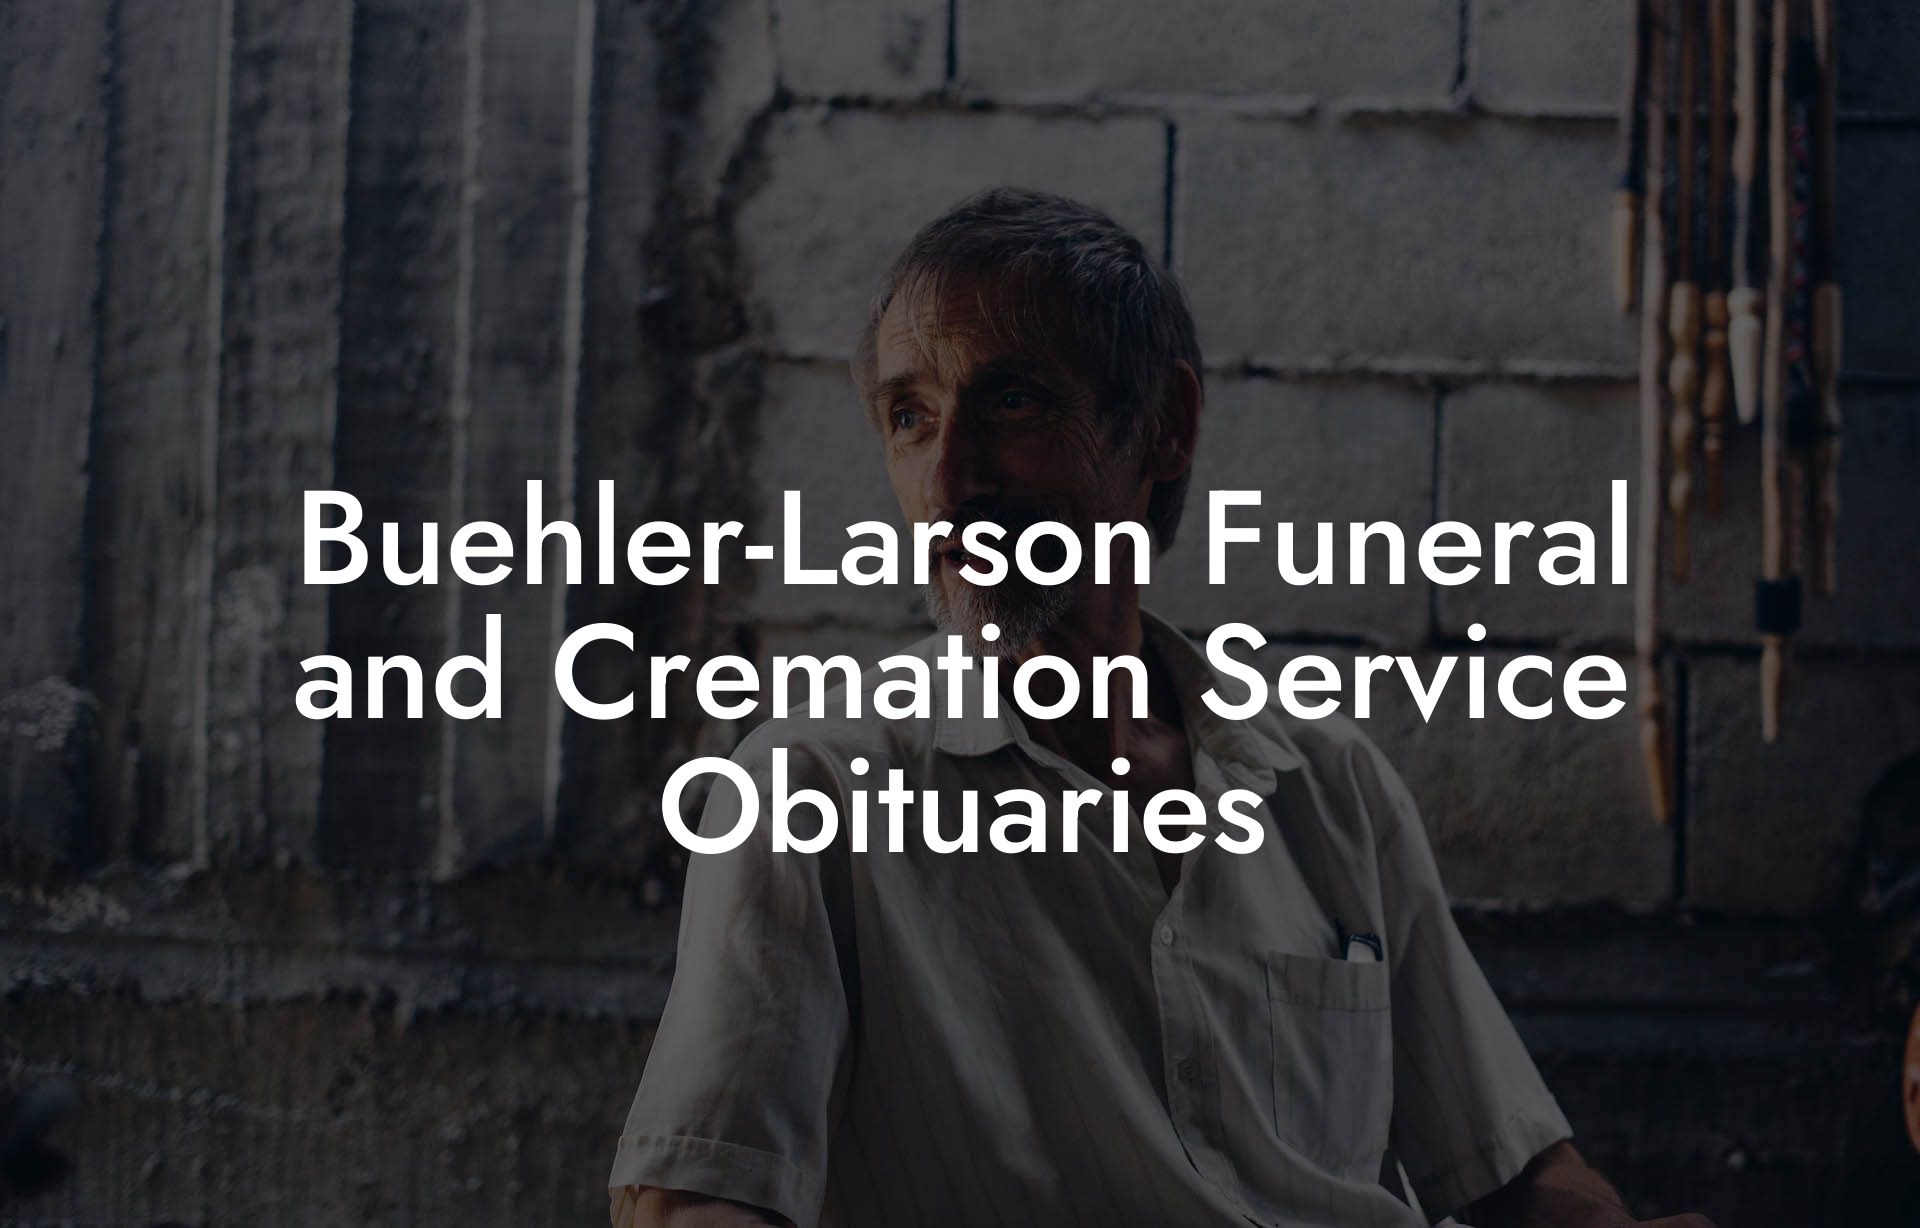 Buehler-Larson Funeral and Cremation Service Obituaries